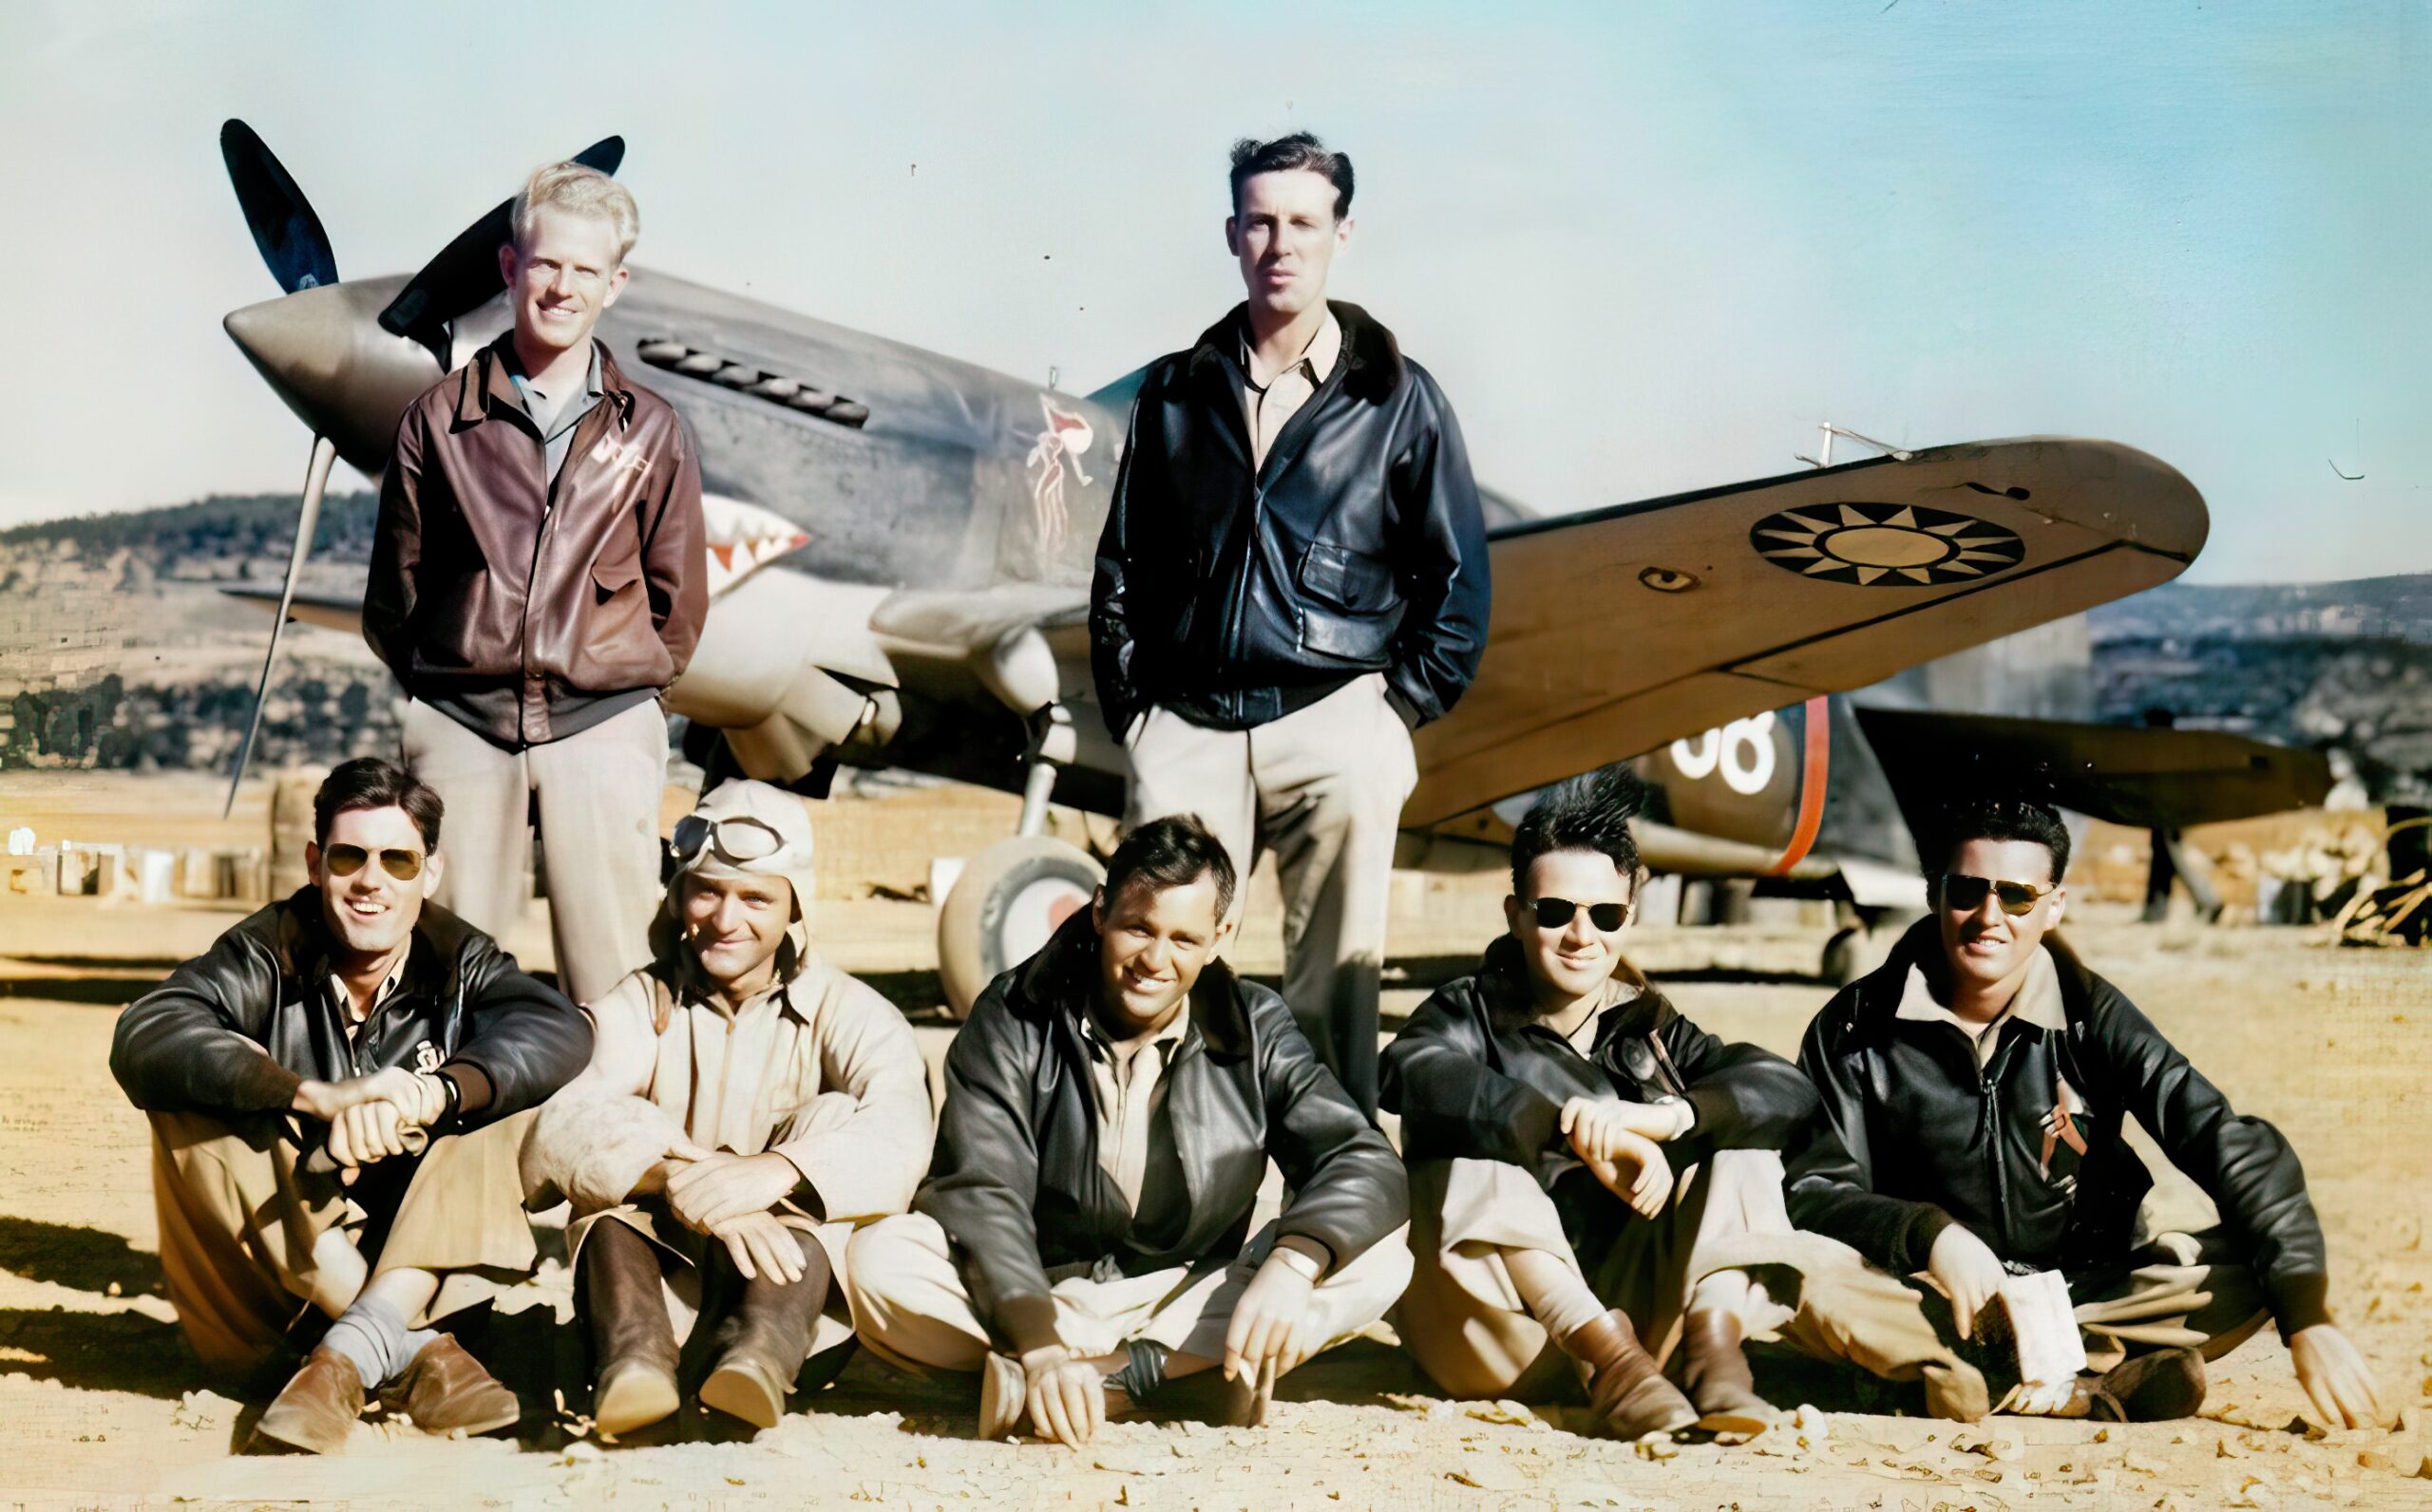 Members of the American Flying Tigers